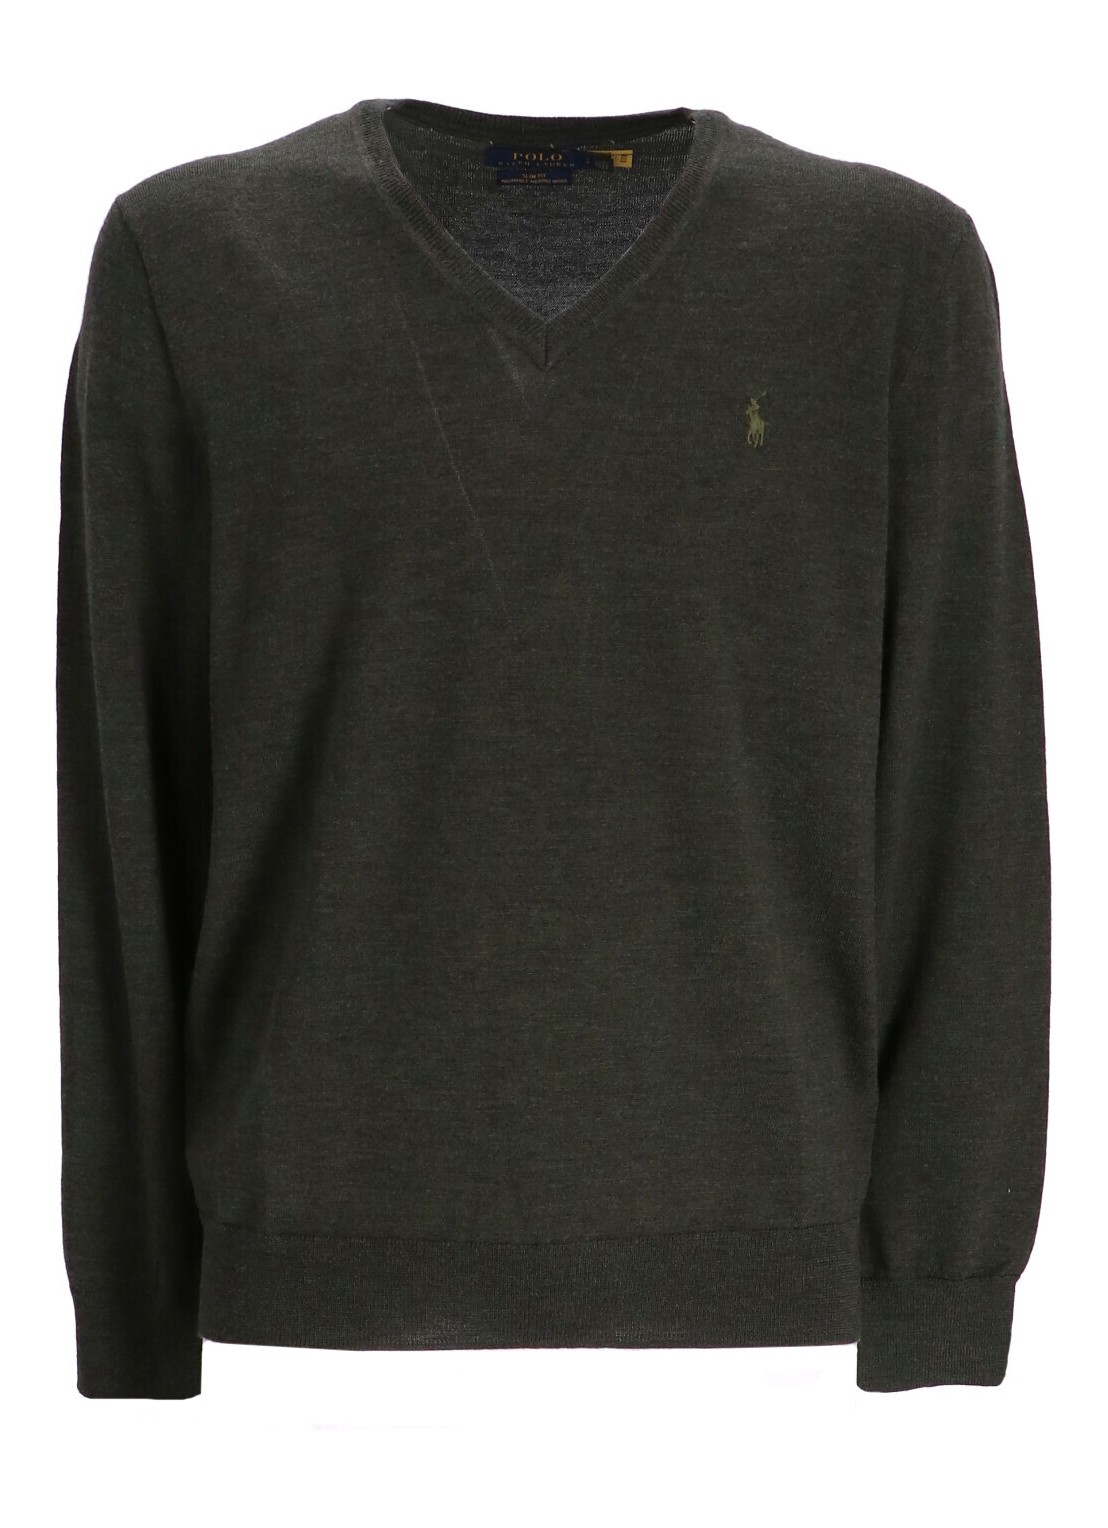 Punto polo ralph lauren knitwear man ls sf vn pp-long sleeve-pullover 710876848012 olive heather tal